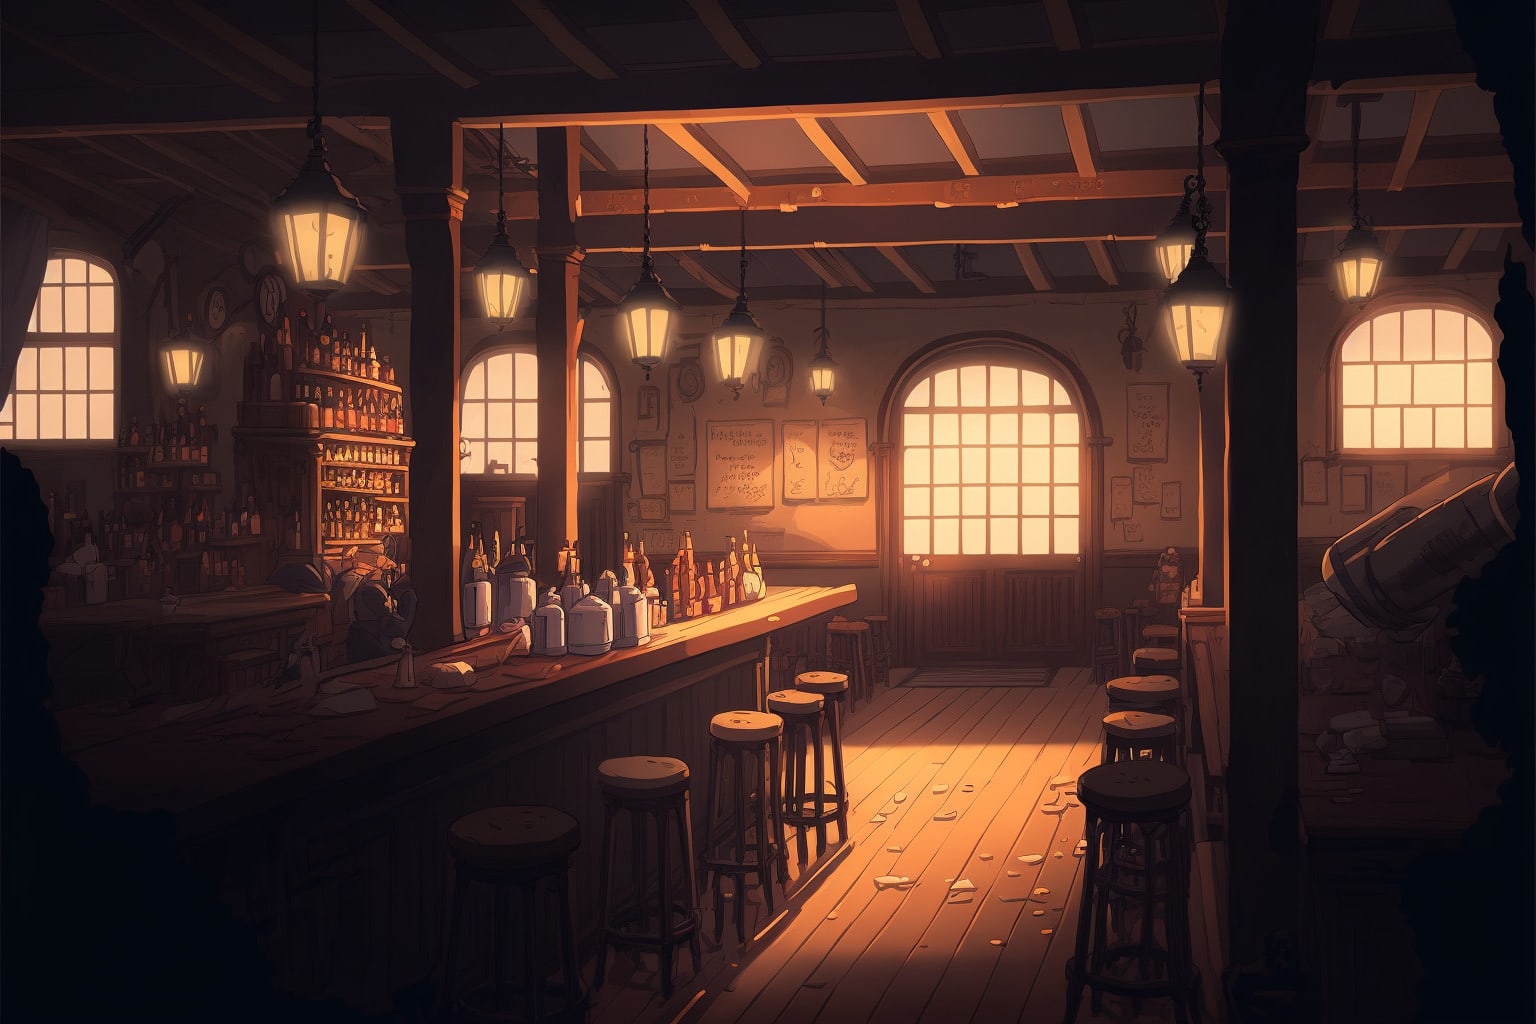 Bar Background Design by Leeah Gauvin on Dribbble